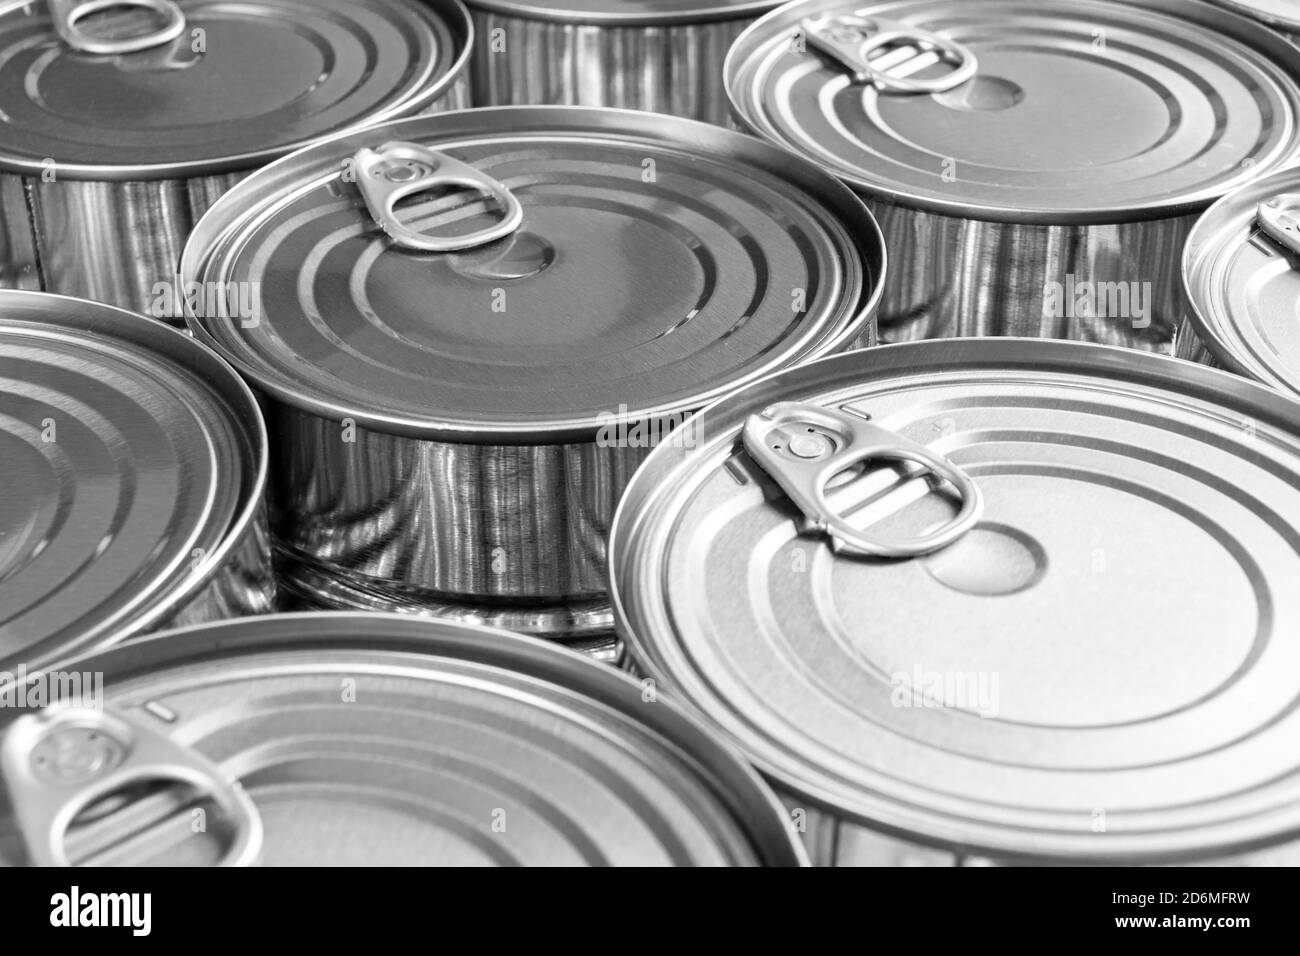 Close up photo of aluminium cans background with opener. Aluminium cans black and white. Aluminium beverage cans top view. Drink can. Metal containers Stock Photo